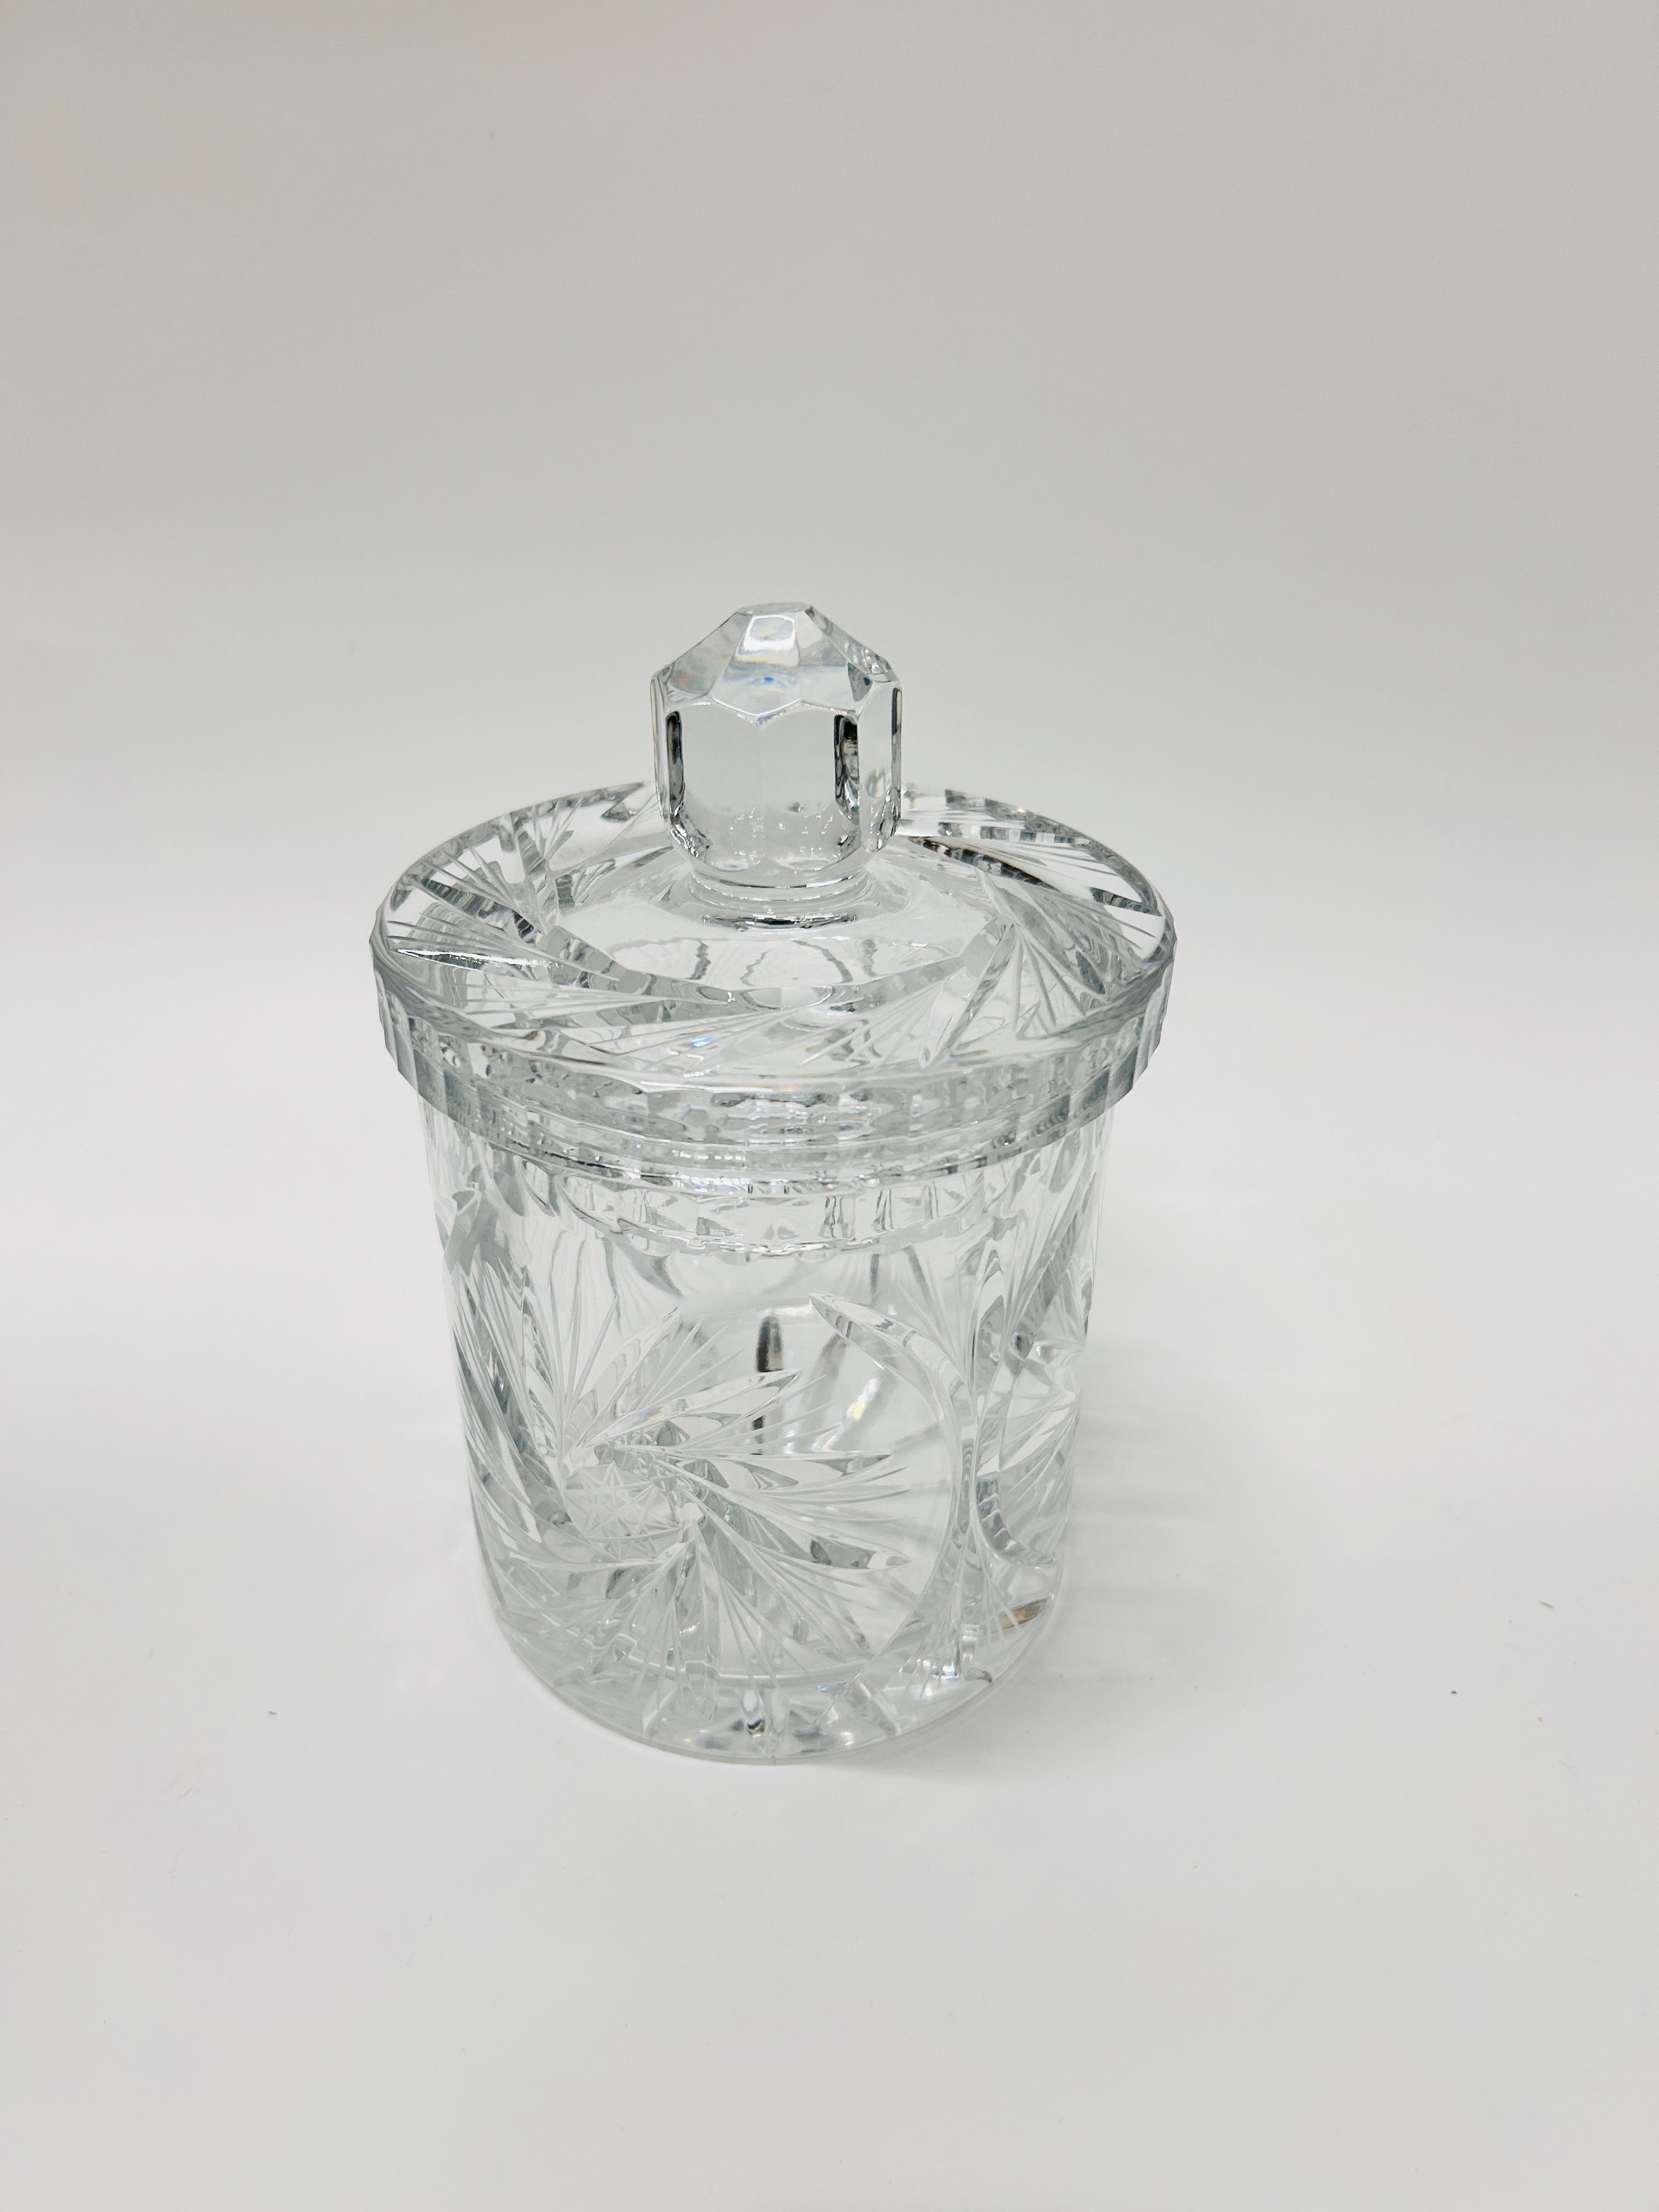 Cut Crystal Candy dish with lid